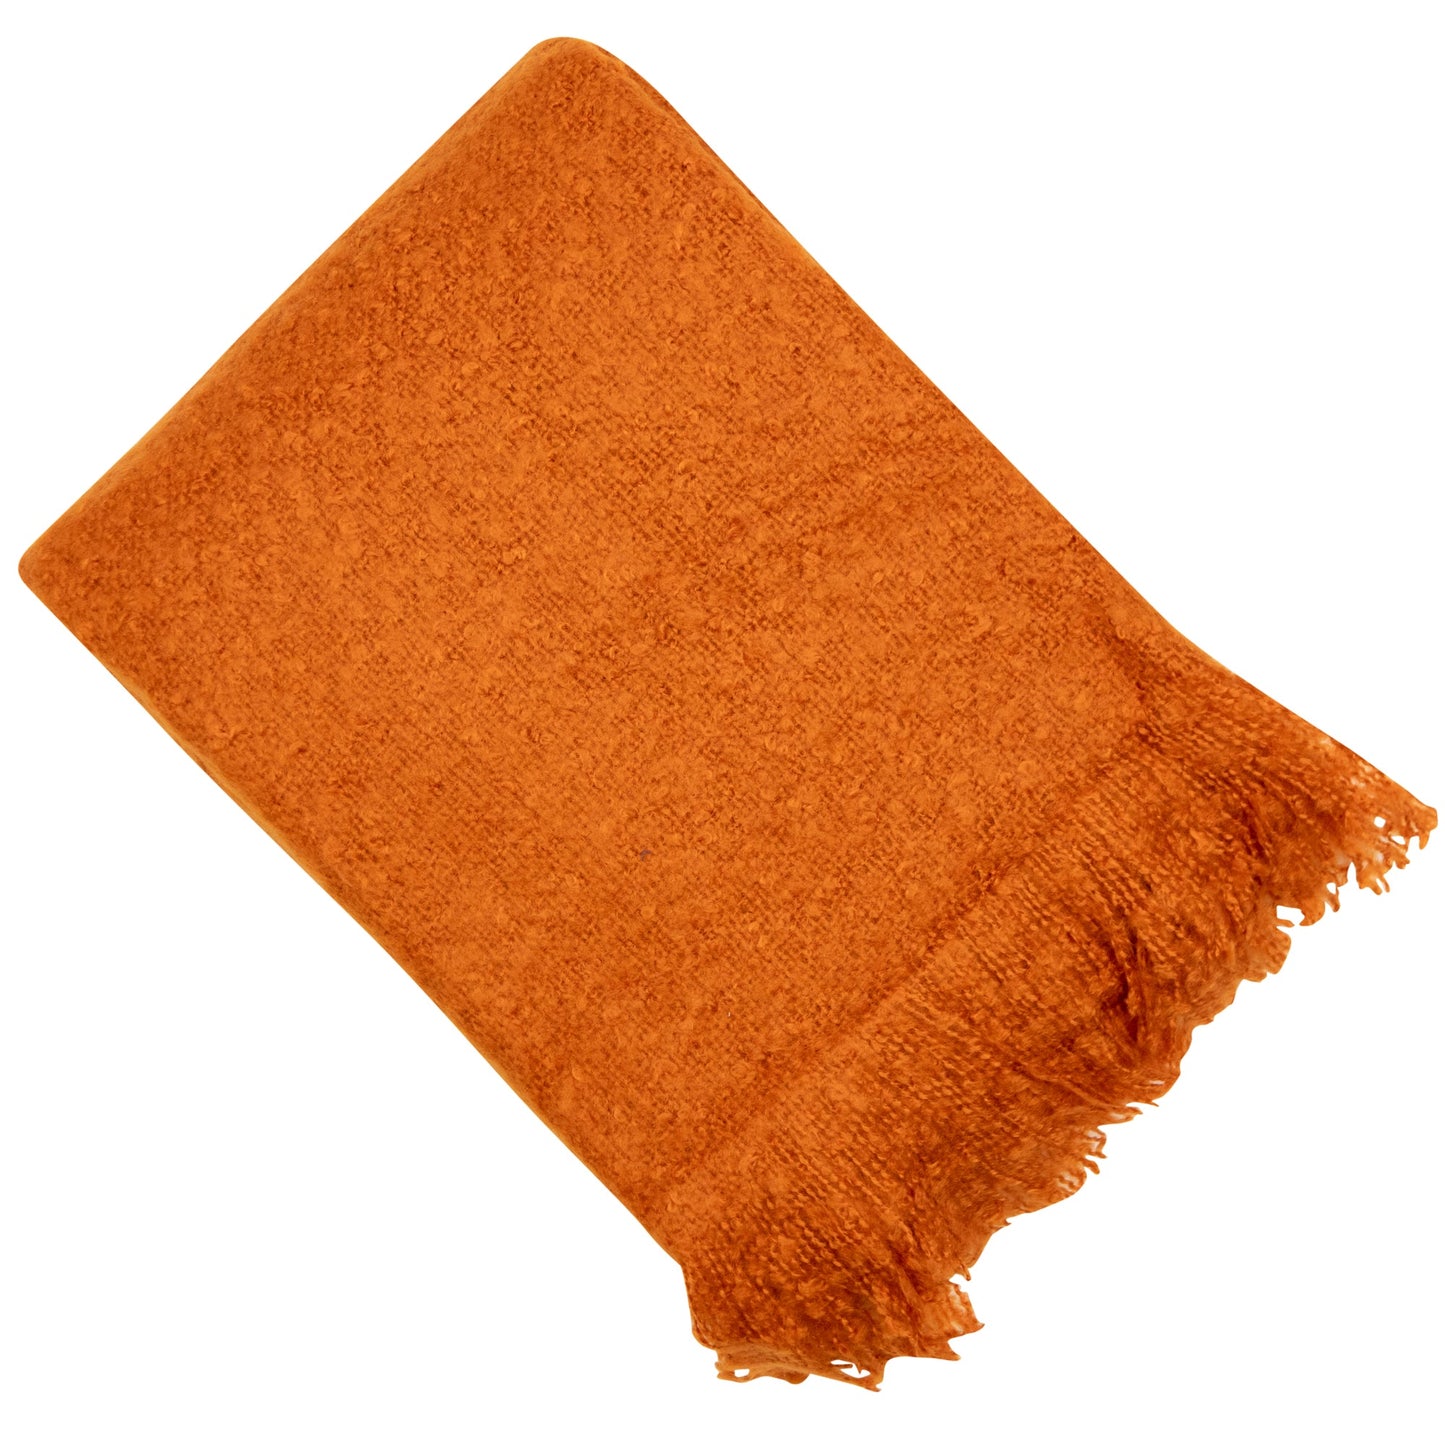 FAUX THICK MOHAIR THROW RUST 130 X 180

Size: 130 X 180 cm